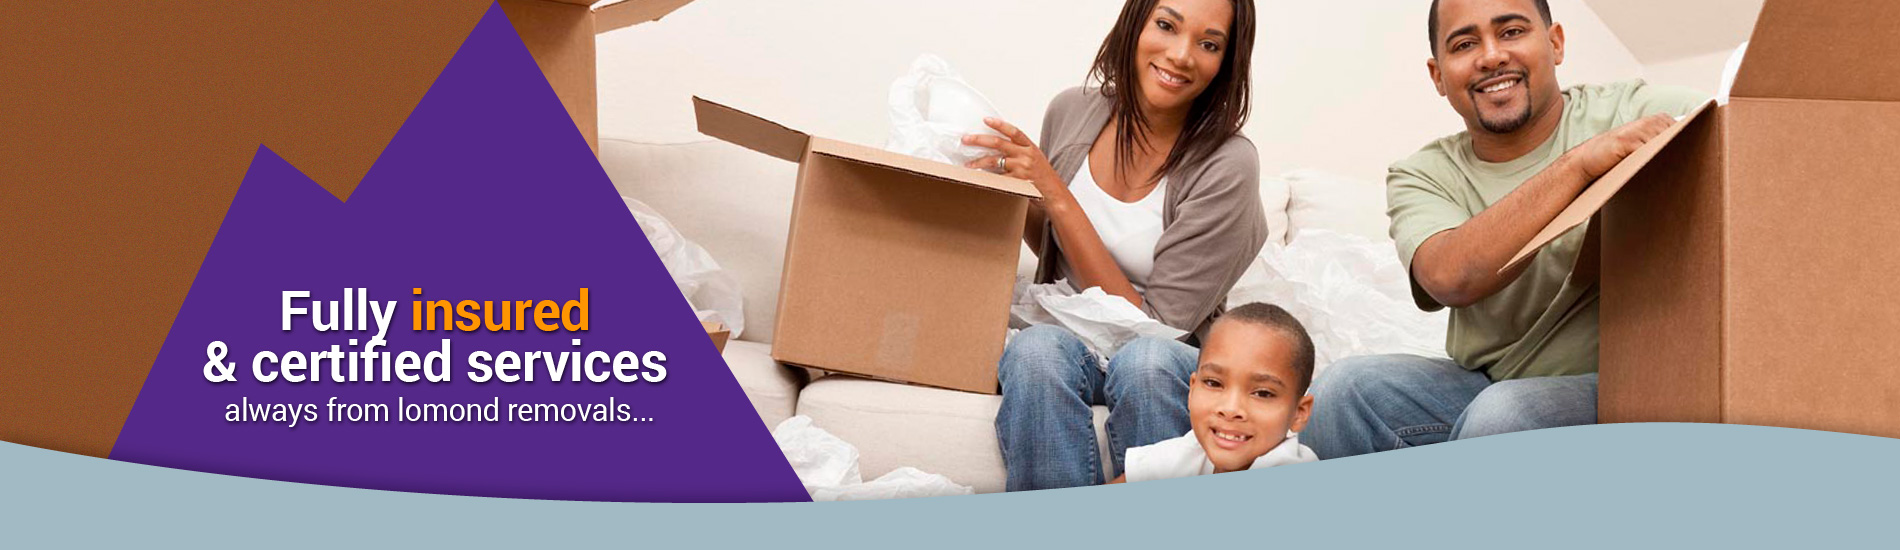 Fully Insured and Secure Removals Glasgow Company